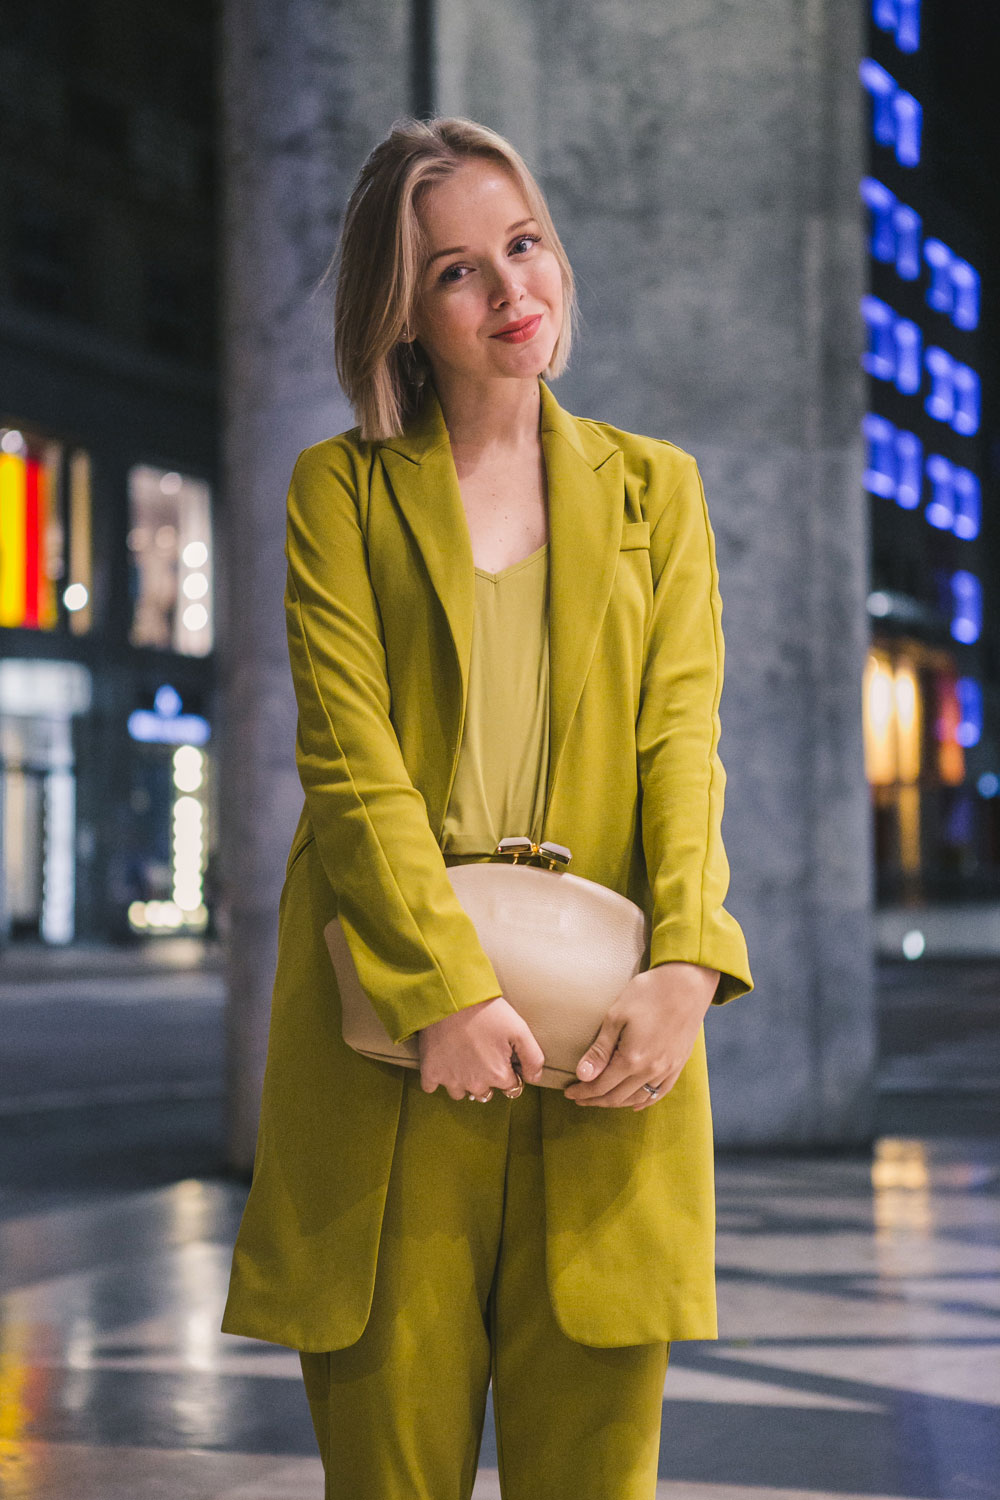 darya-kamalova-fashion-lifestyle-blogger-from-thecablook-on-san-pietro-all-orto-opening-party-in-milan-wears-asos-suit-marni-clutch-burberry-prosum-wedges-6979